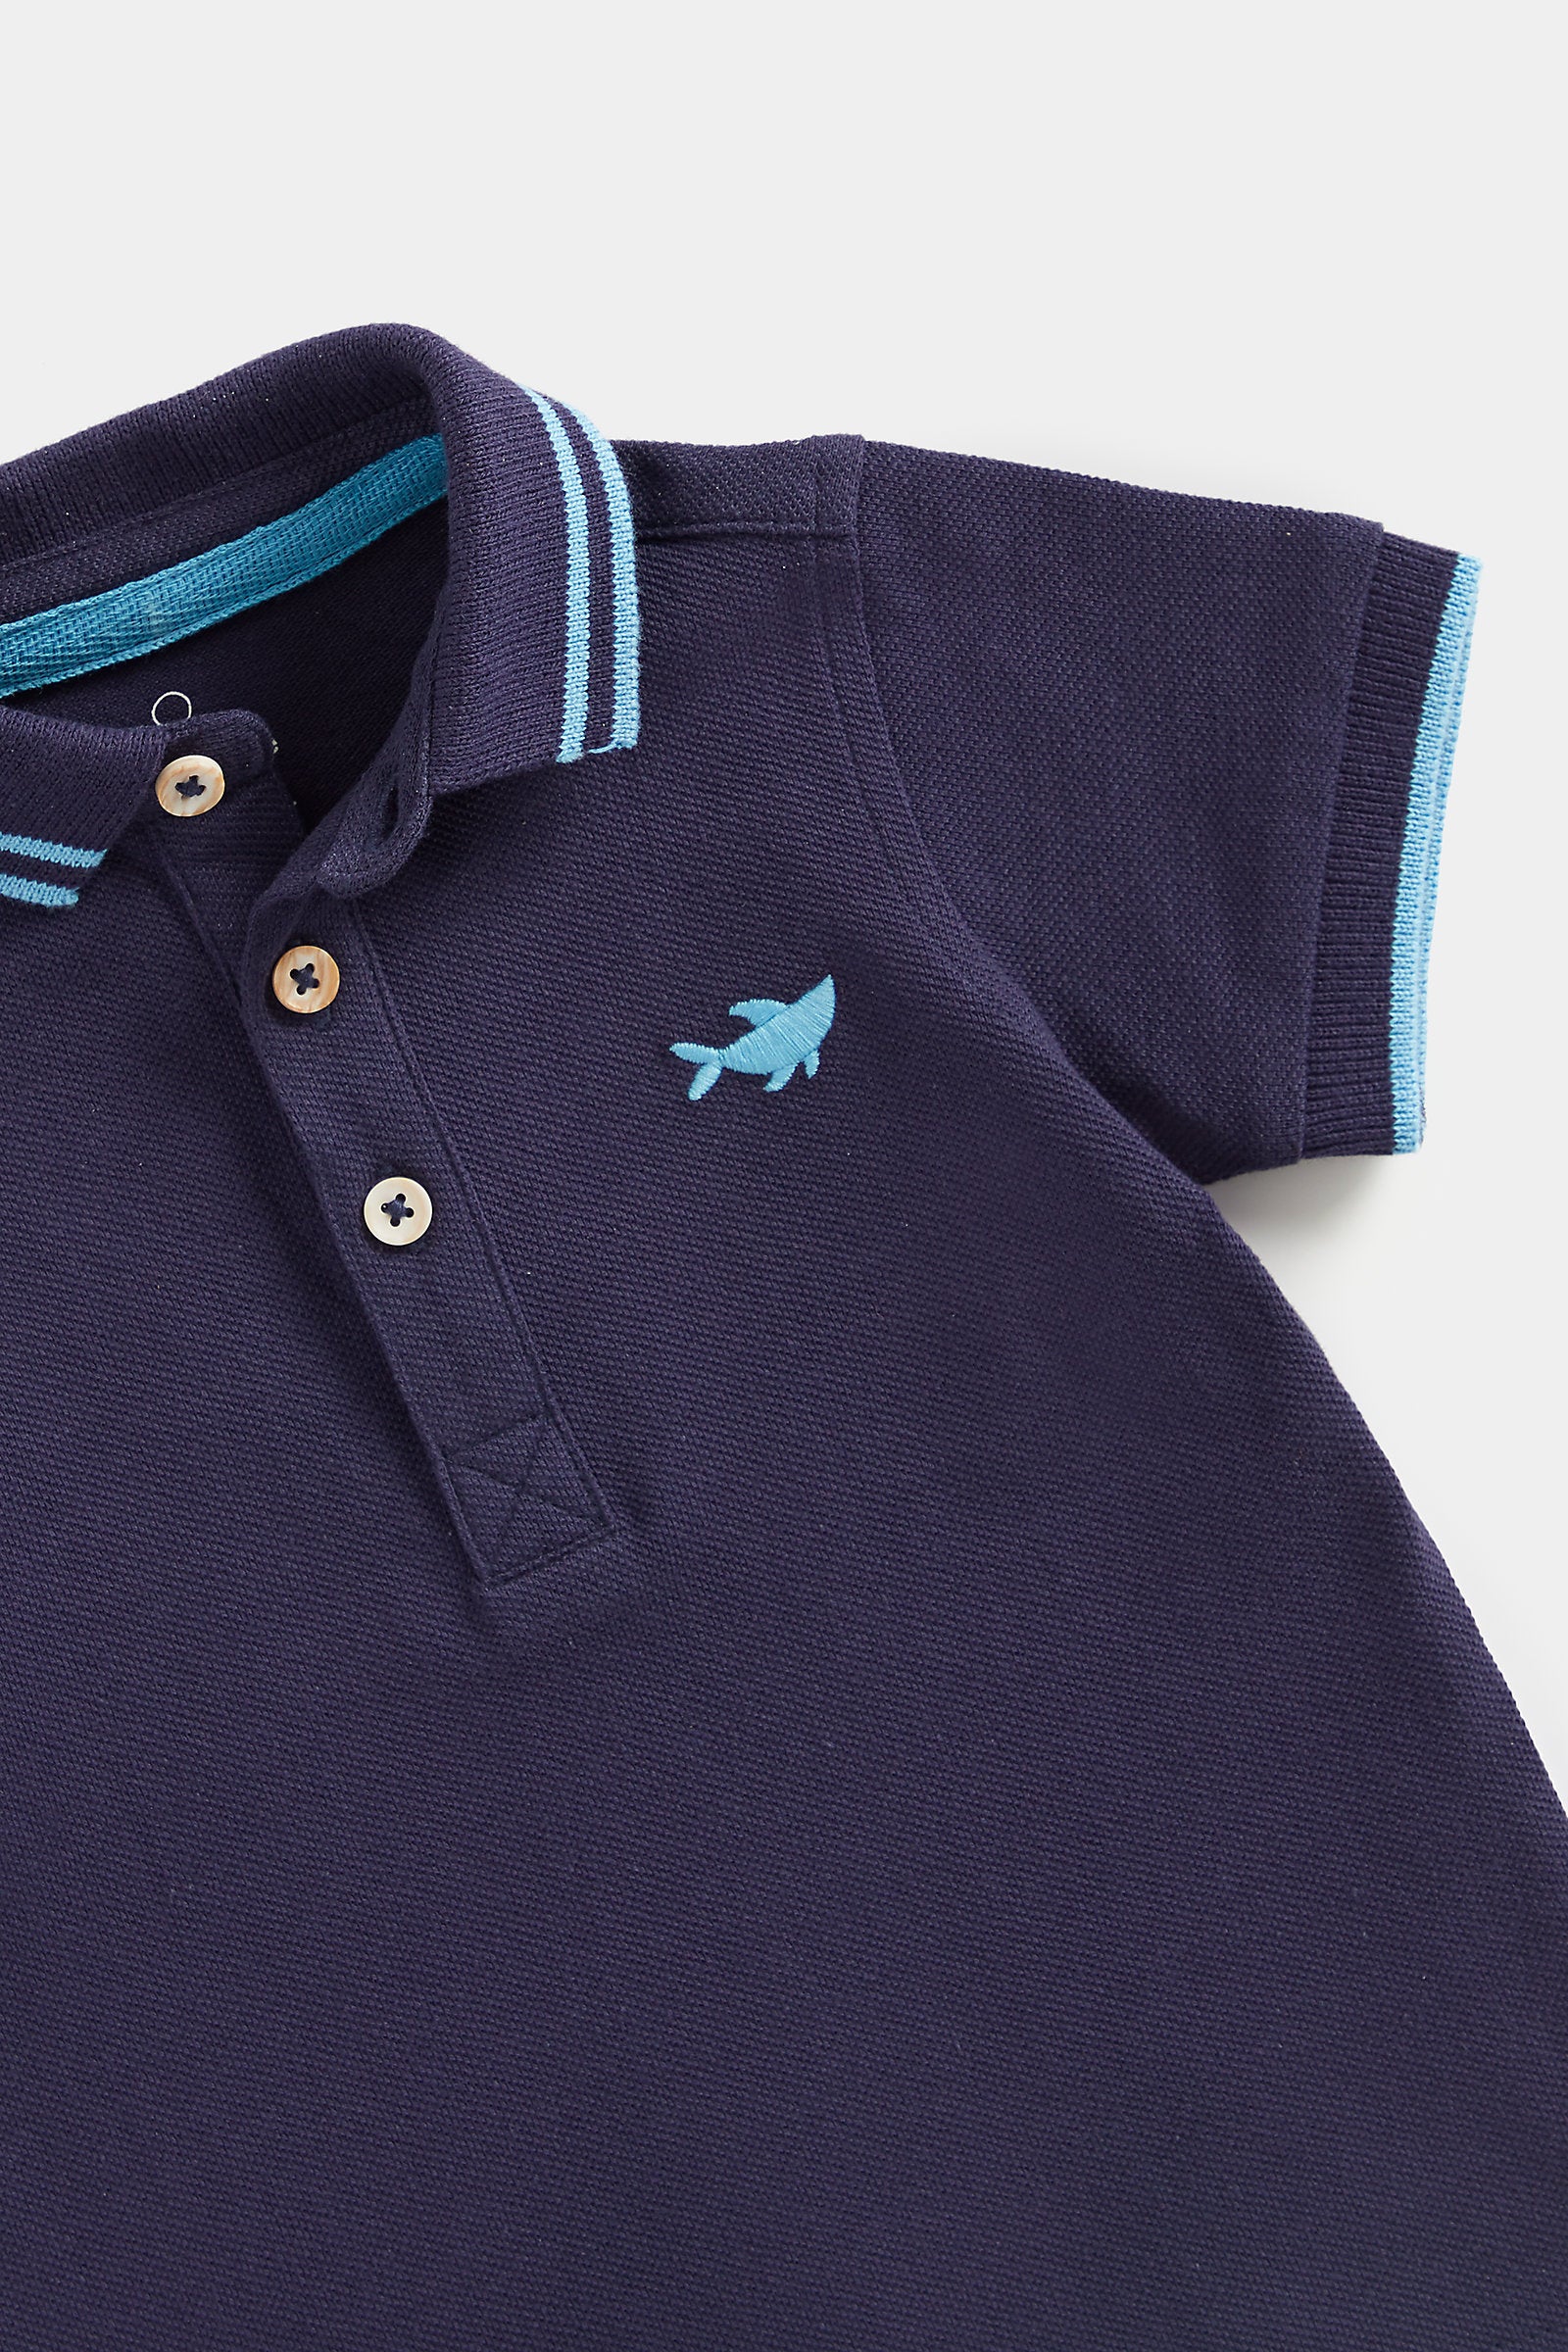 Mothercare Whale Polo Shirt and Shorts Set